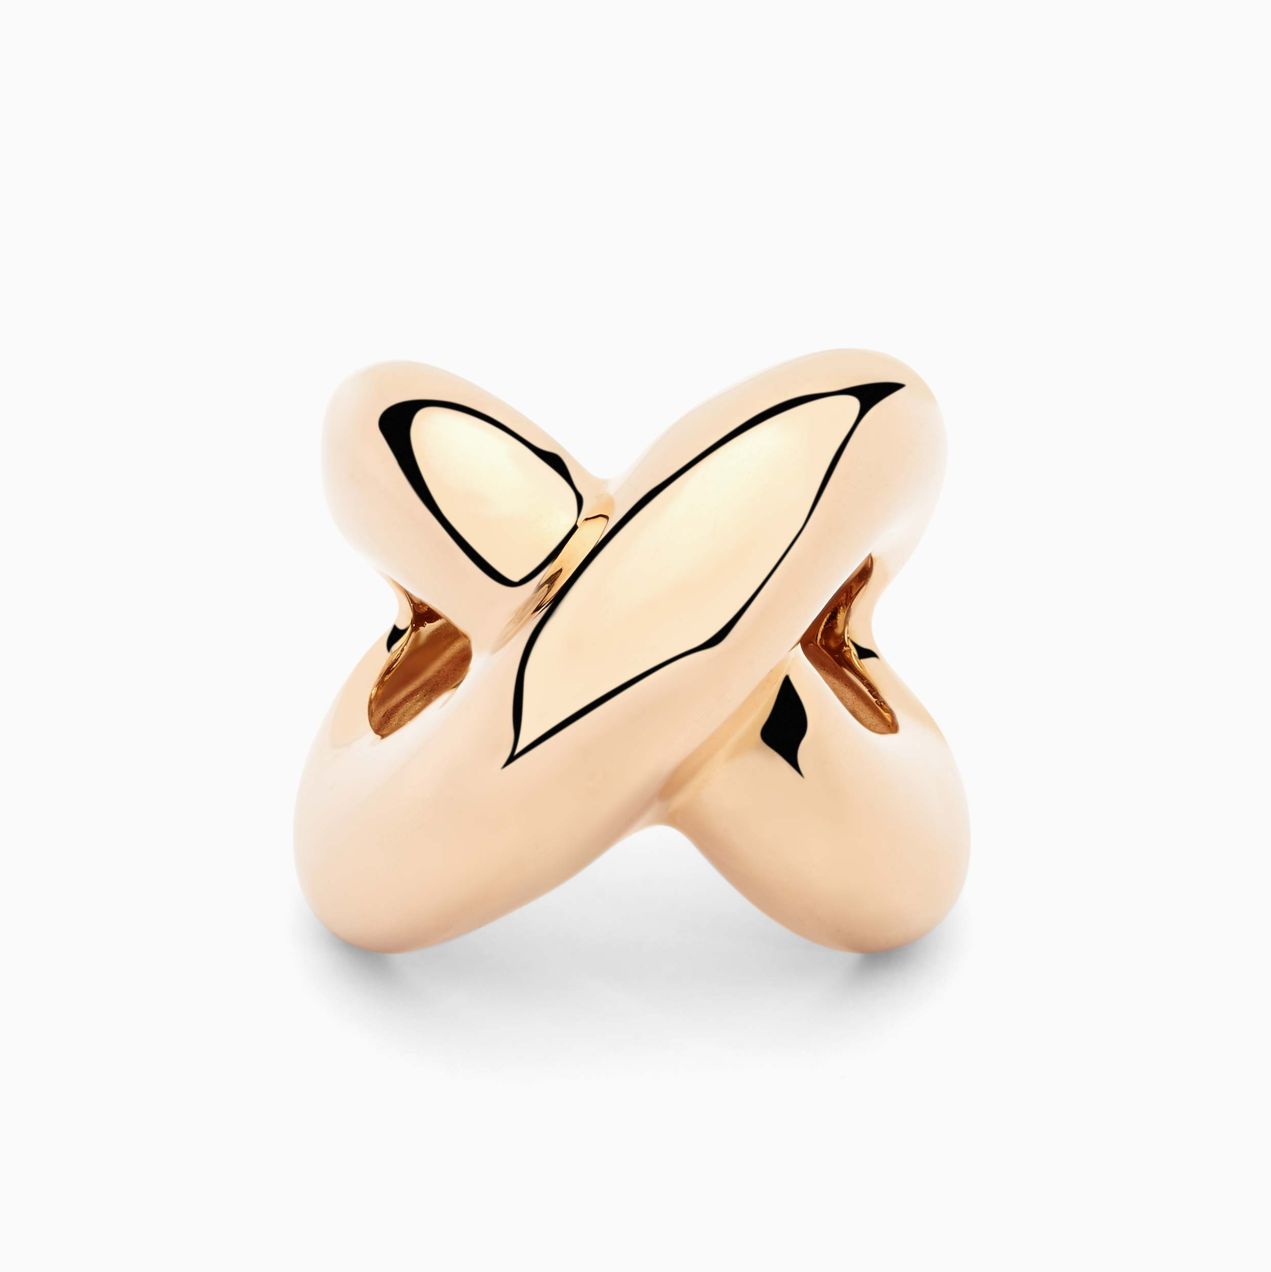 Rose Gold Ring with Crossed Rows 